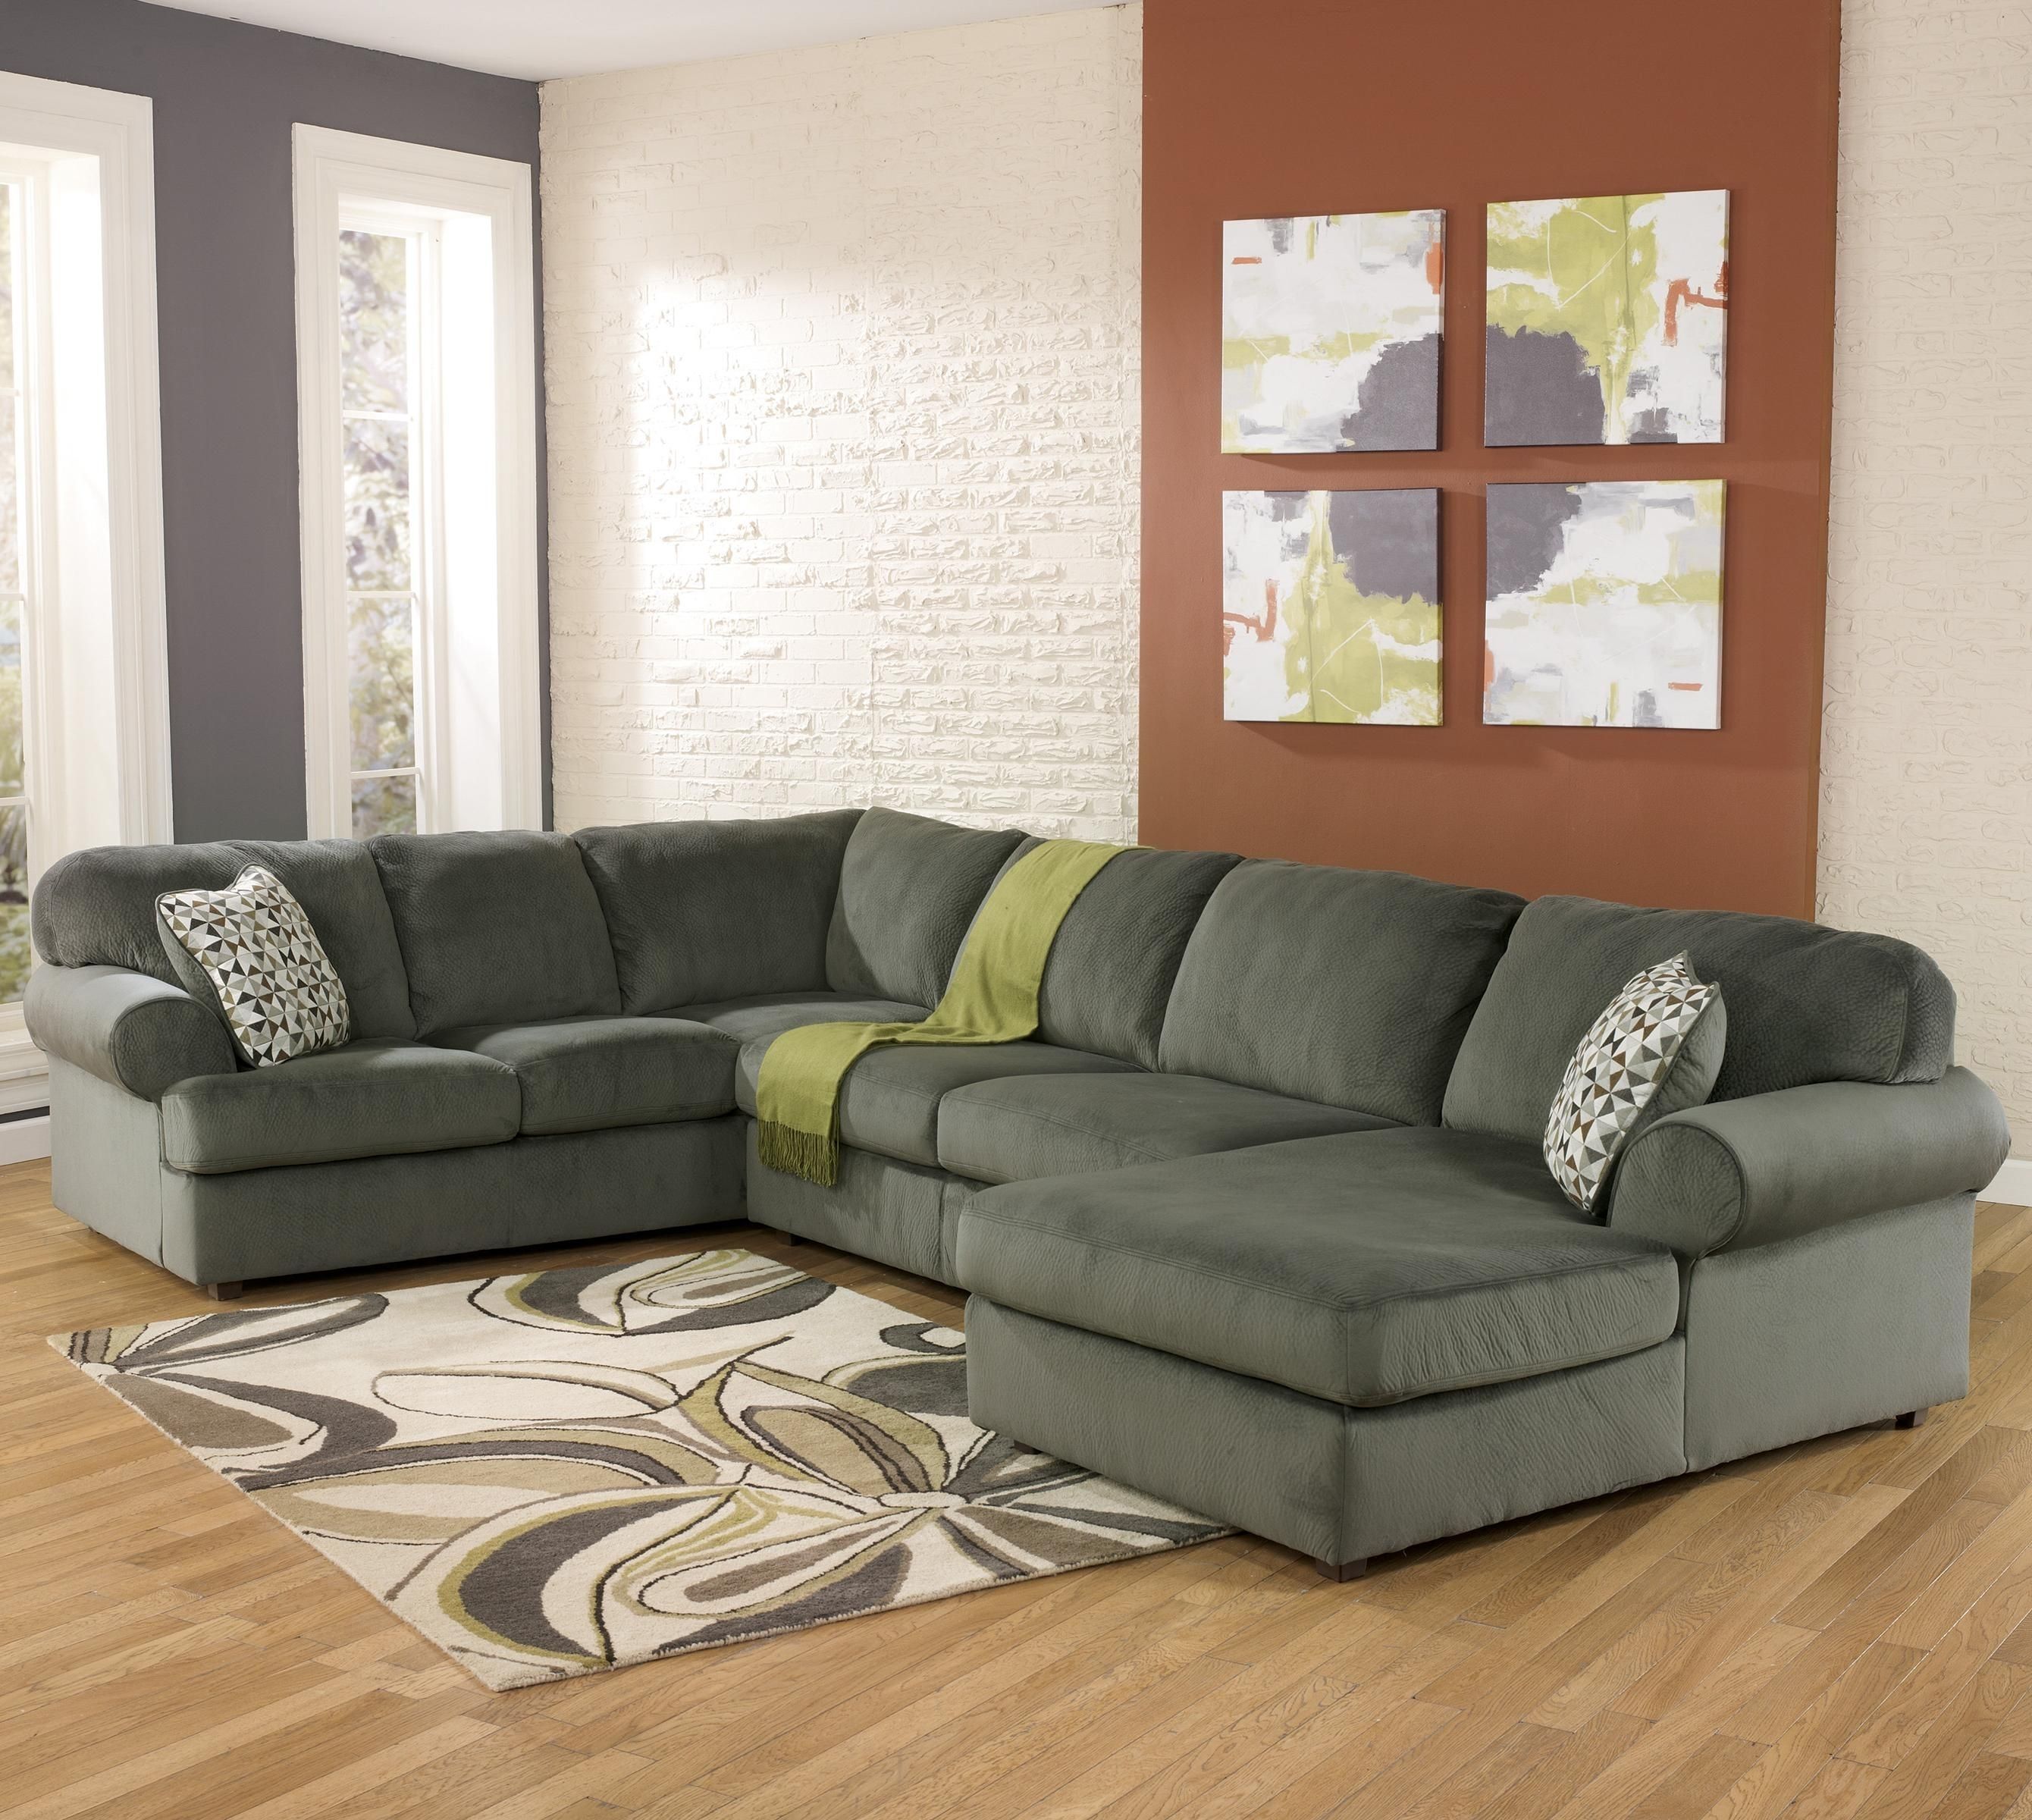 Jessa Place – Pewter Casual Sectional Sofa With Right Chaise In Pensacola Fl Sectional Sofas (View 8 of 10)